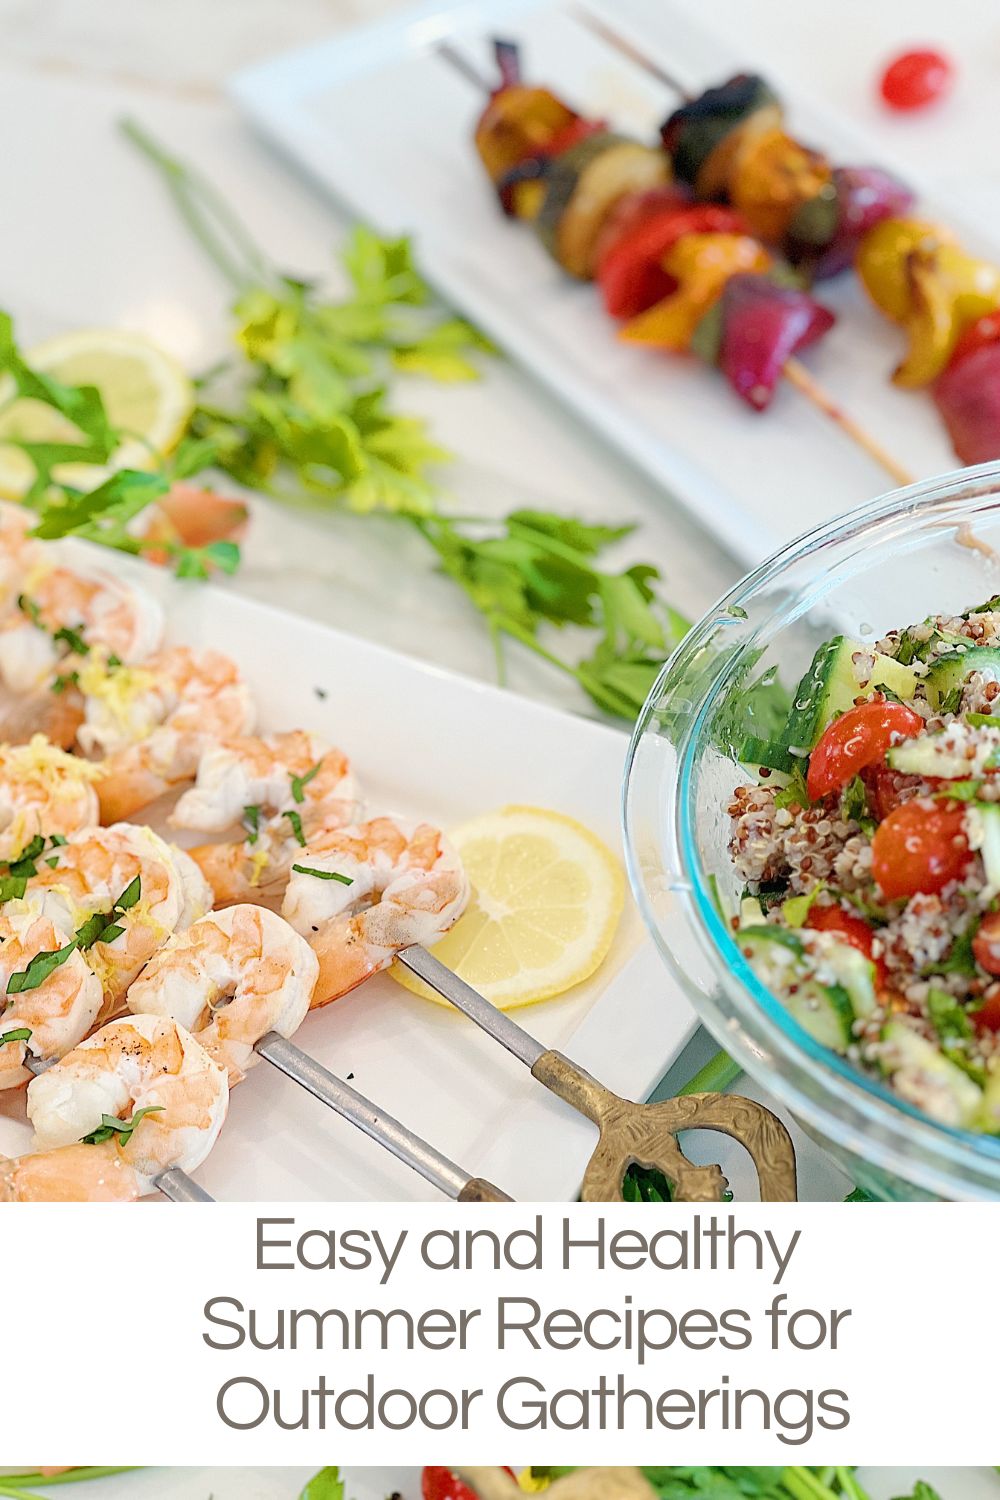 Summer is the time to gather with friends and family outdoors to enjoy some of the best healthy summer recipes.